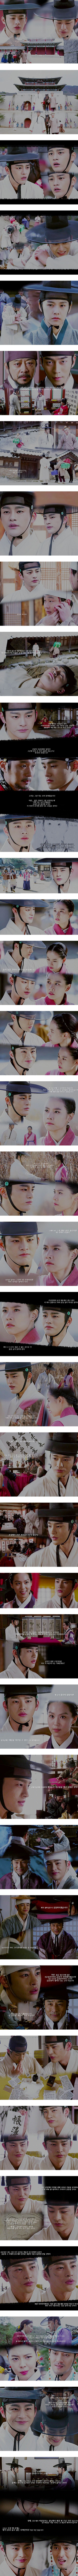 episode 7 captures for the Korean drama 'The King's Face'